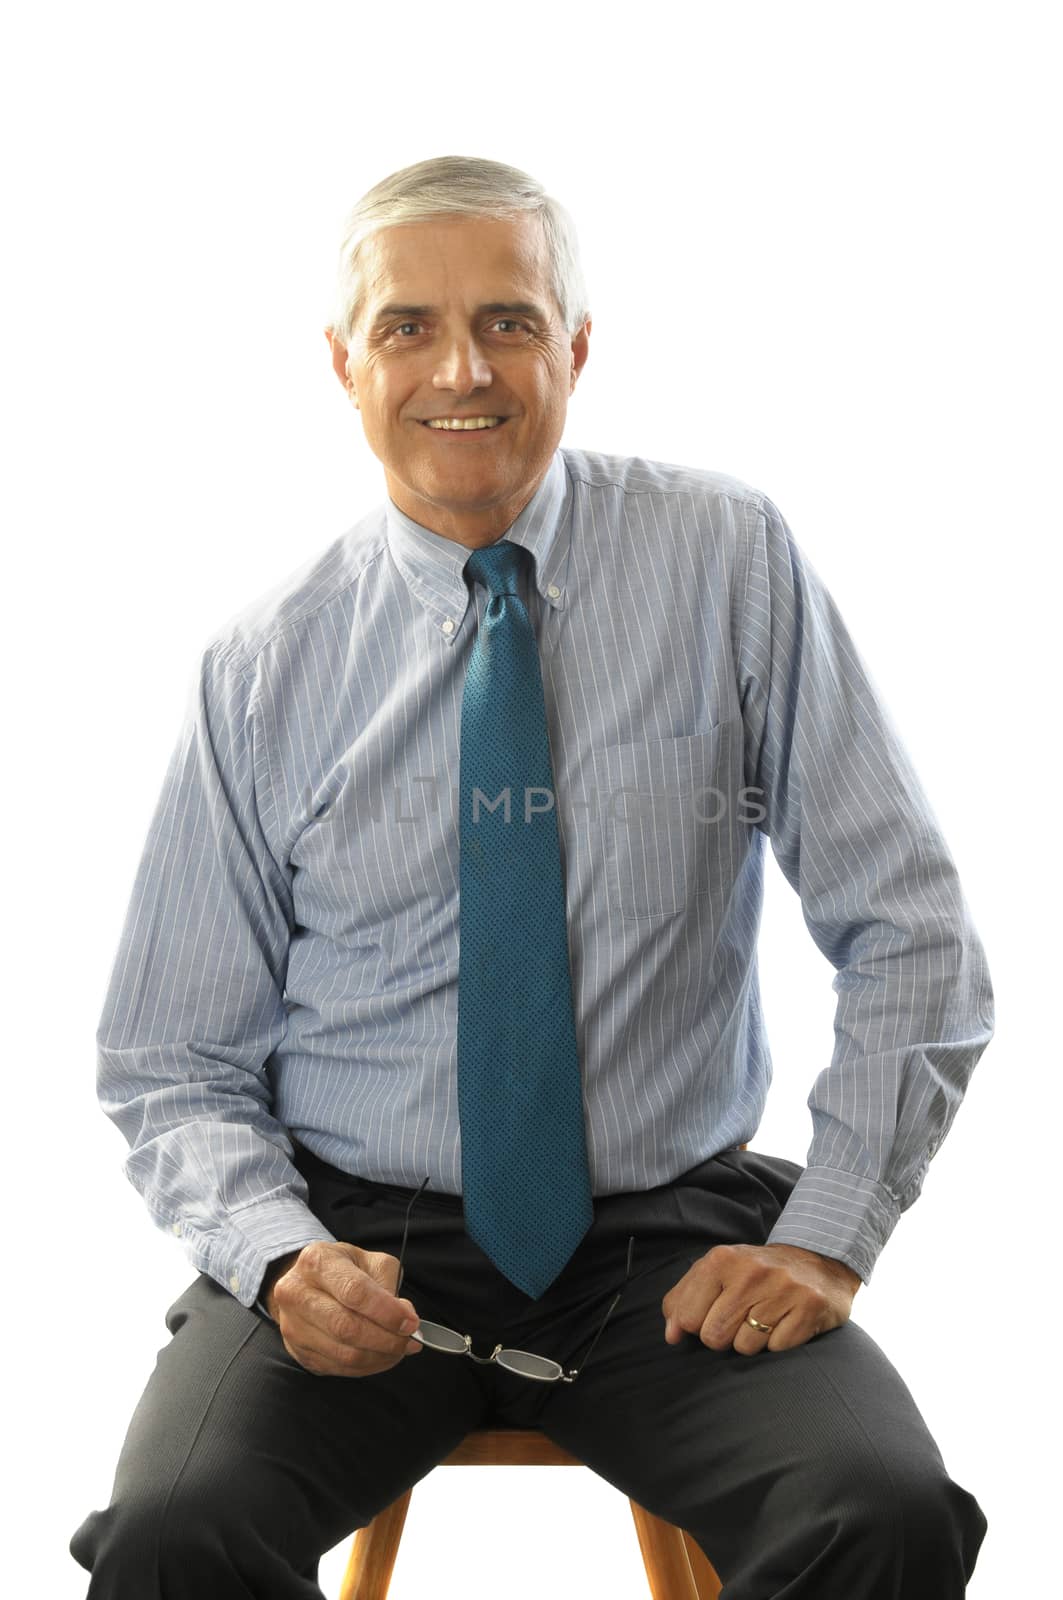 Businessman sitting on a stool holding his eye glasses isolated on white background vertical format